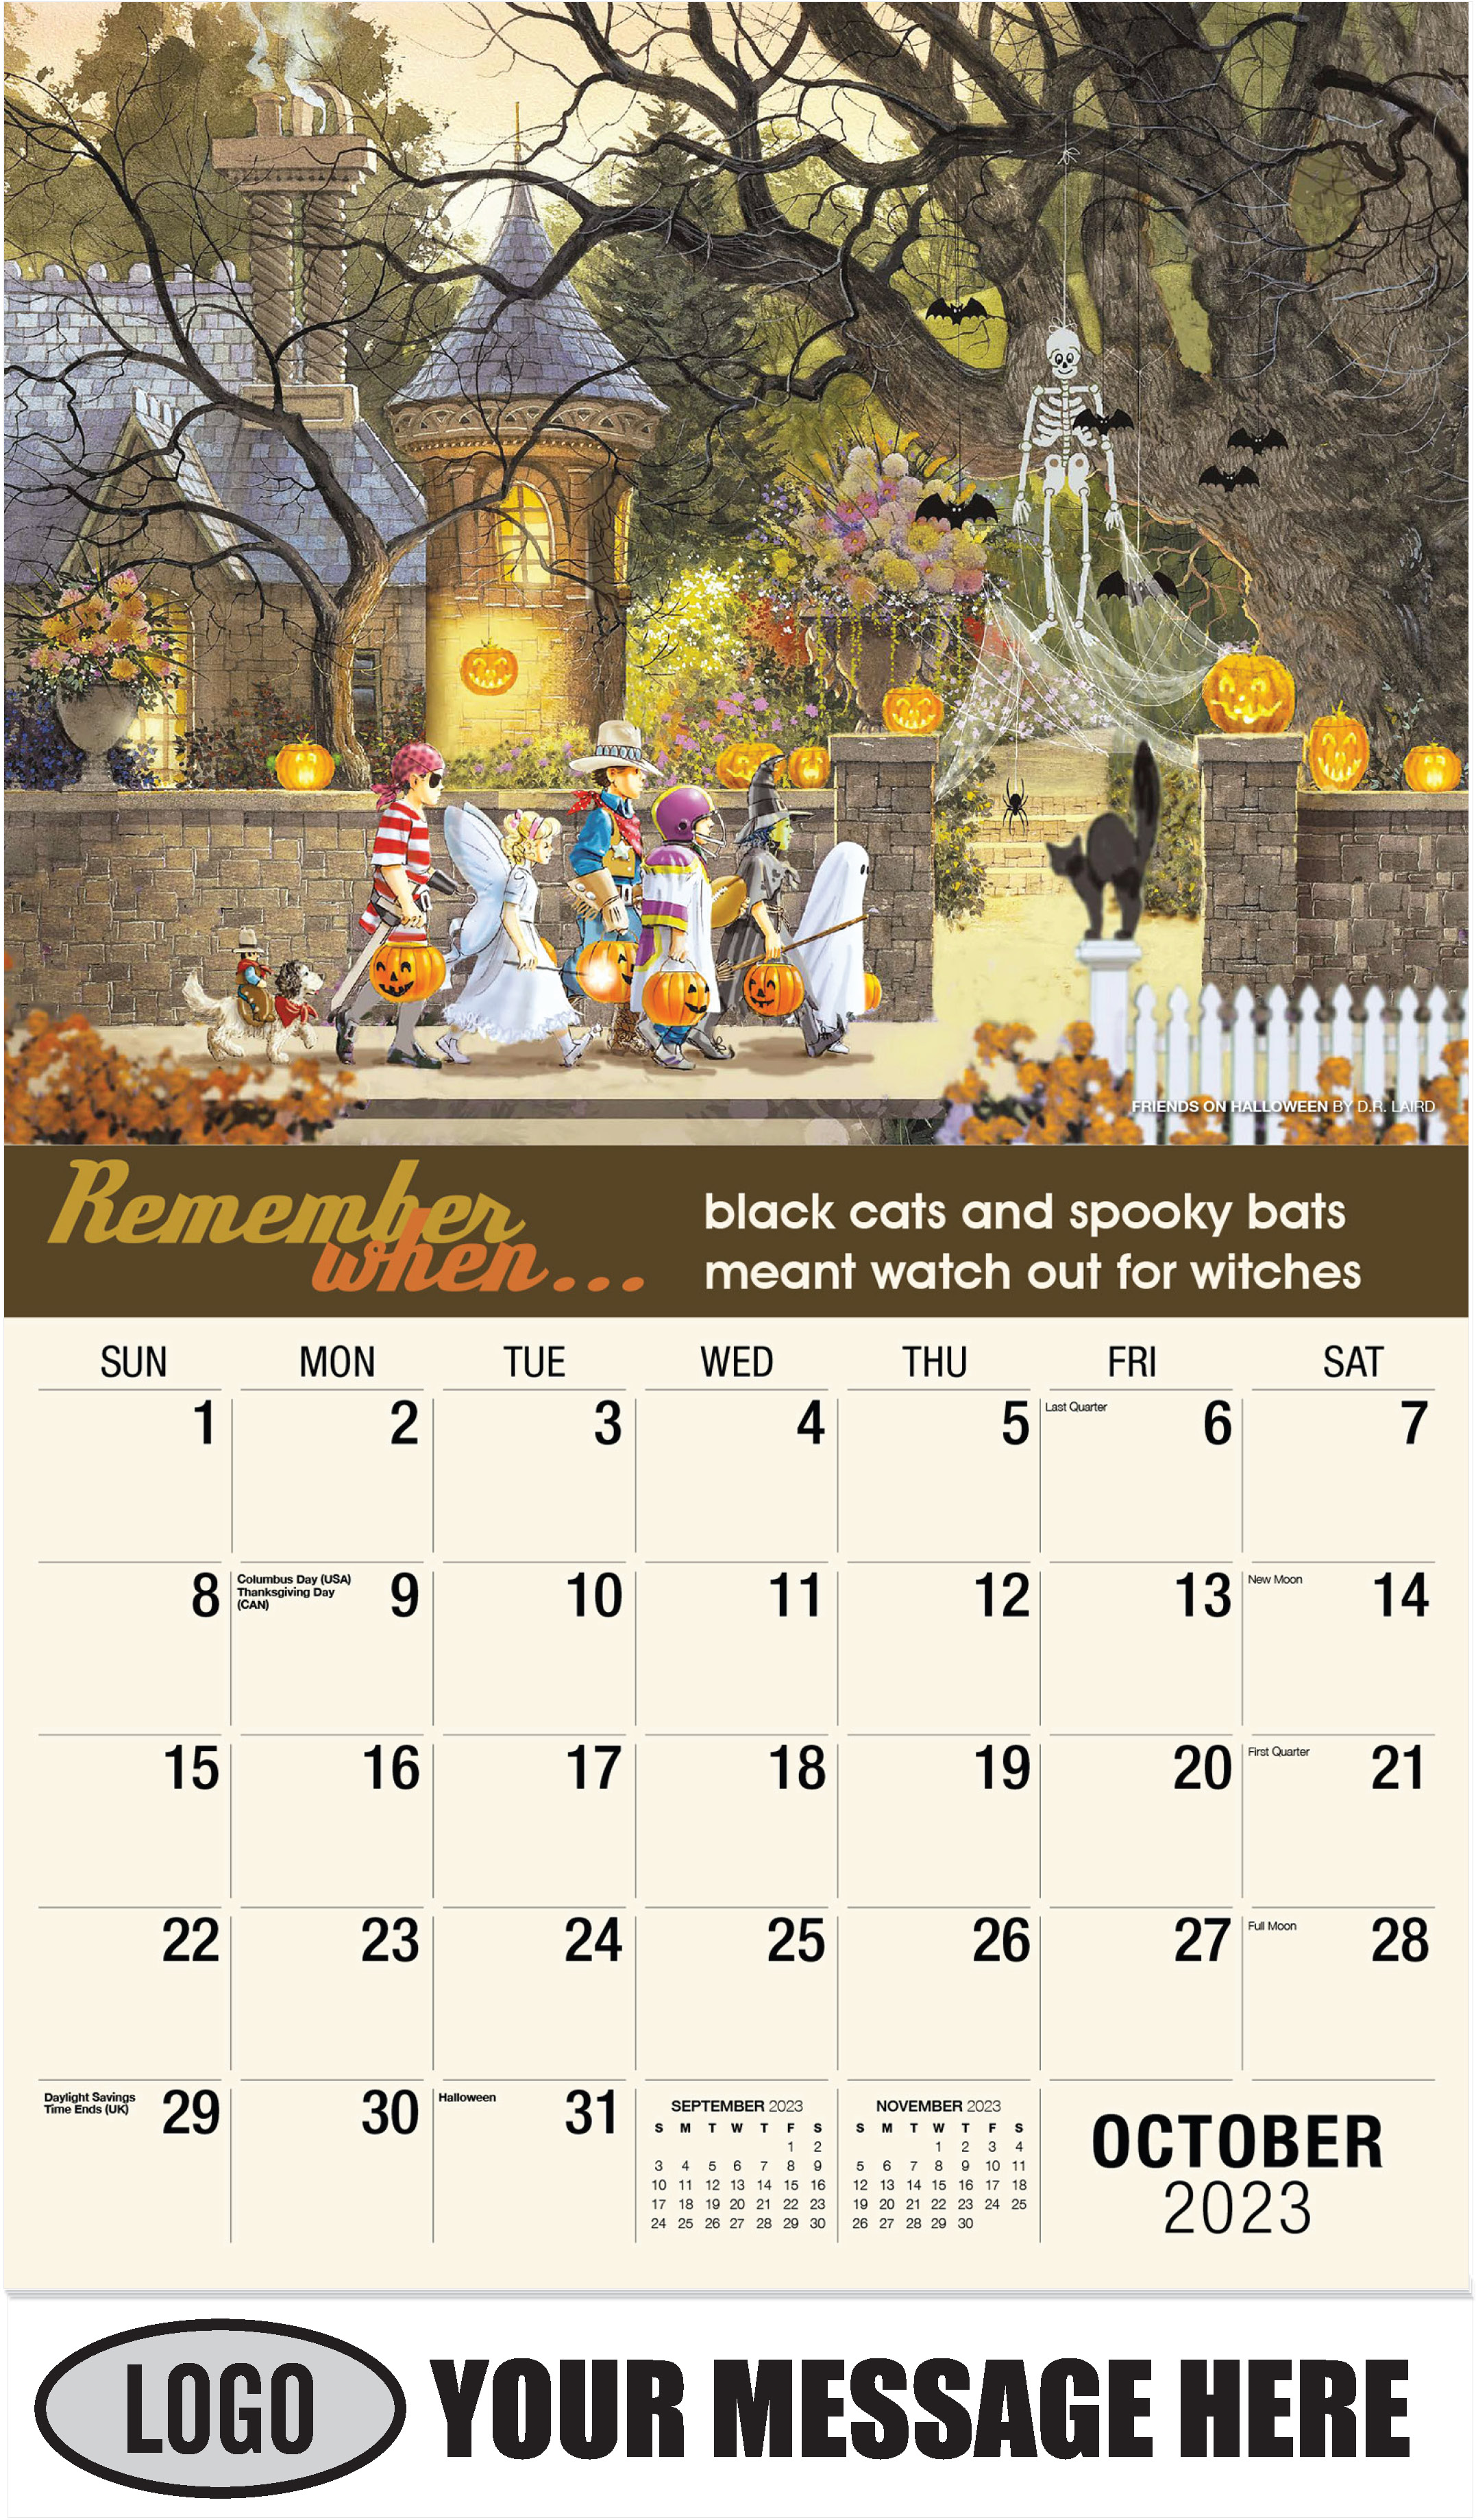 Friends On Halloween by D.R. Laird - October - Remember When 2023 Promotional Calendar